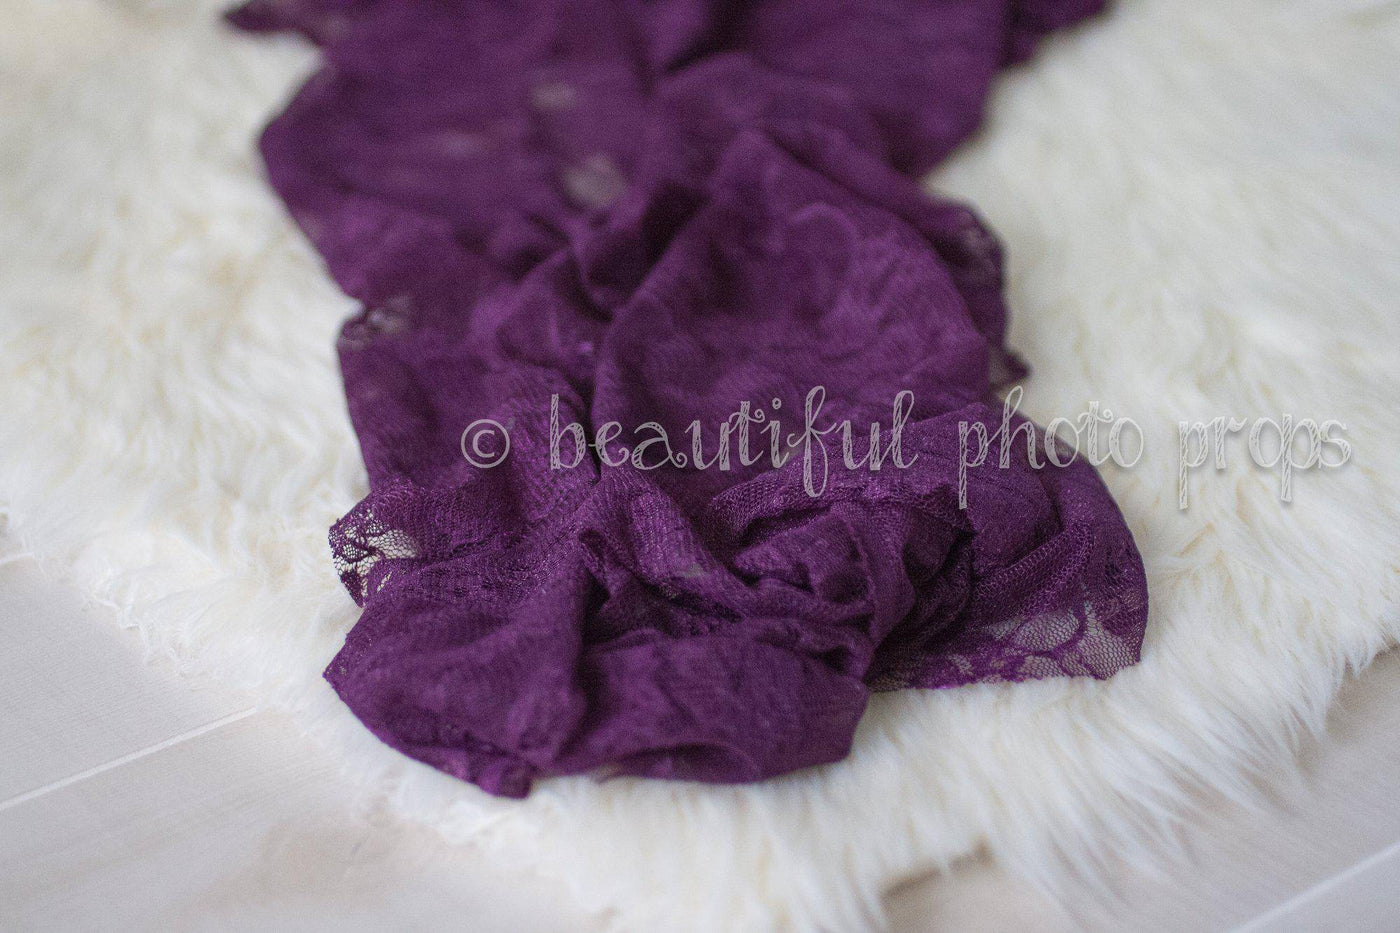 Stretch Lace Wrap in Eggplant Purple - Beautiful Photo Props